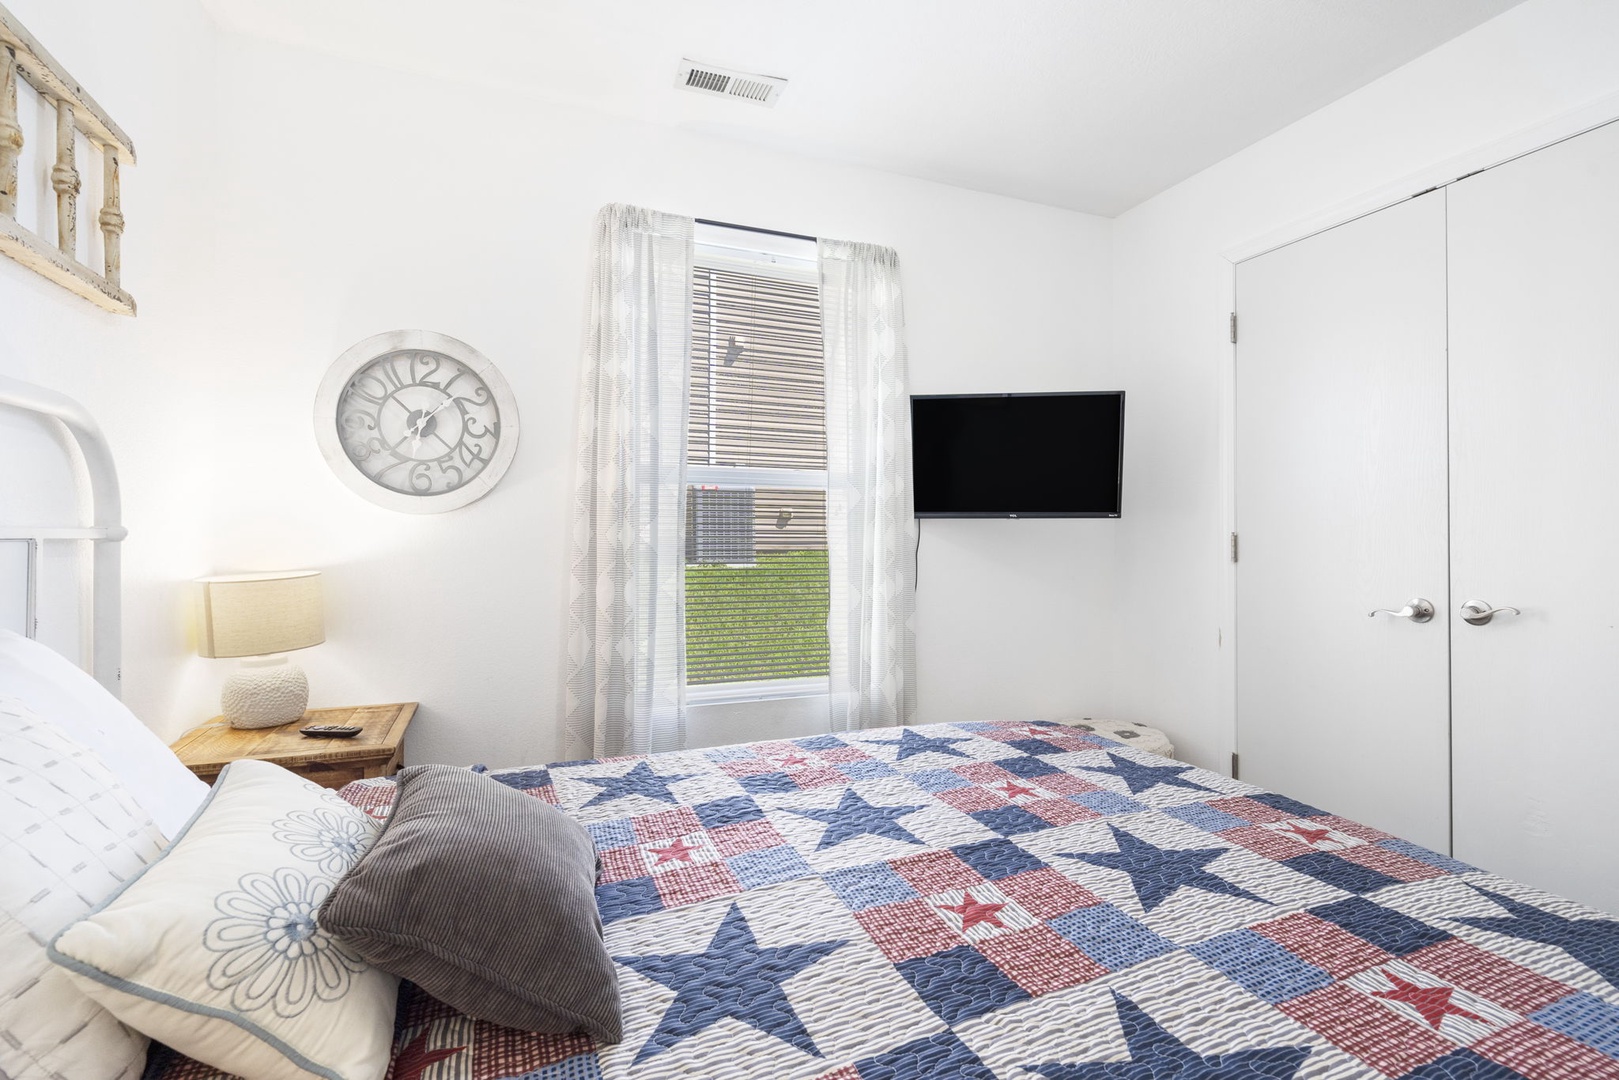 The second bedroom offers guests a queen bed & Smart TV